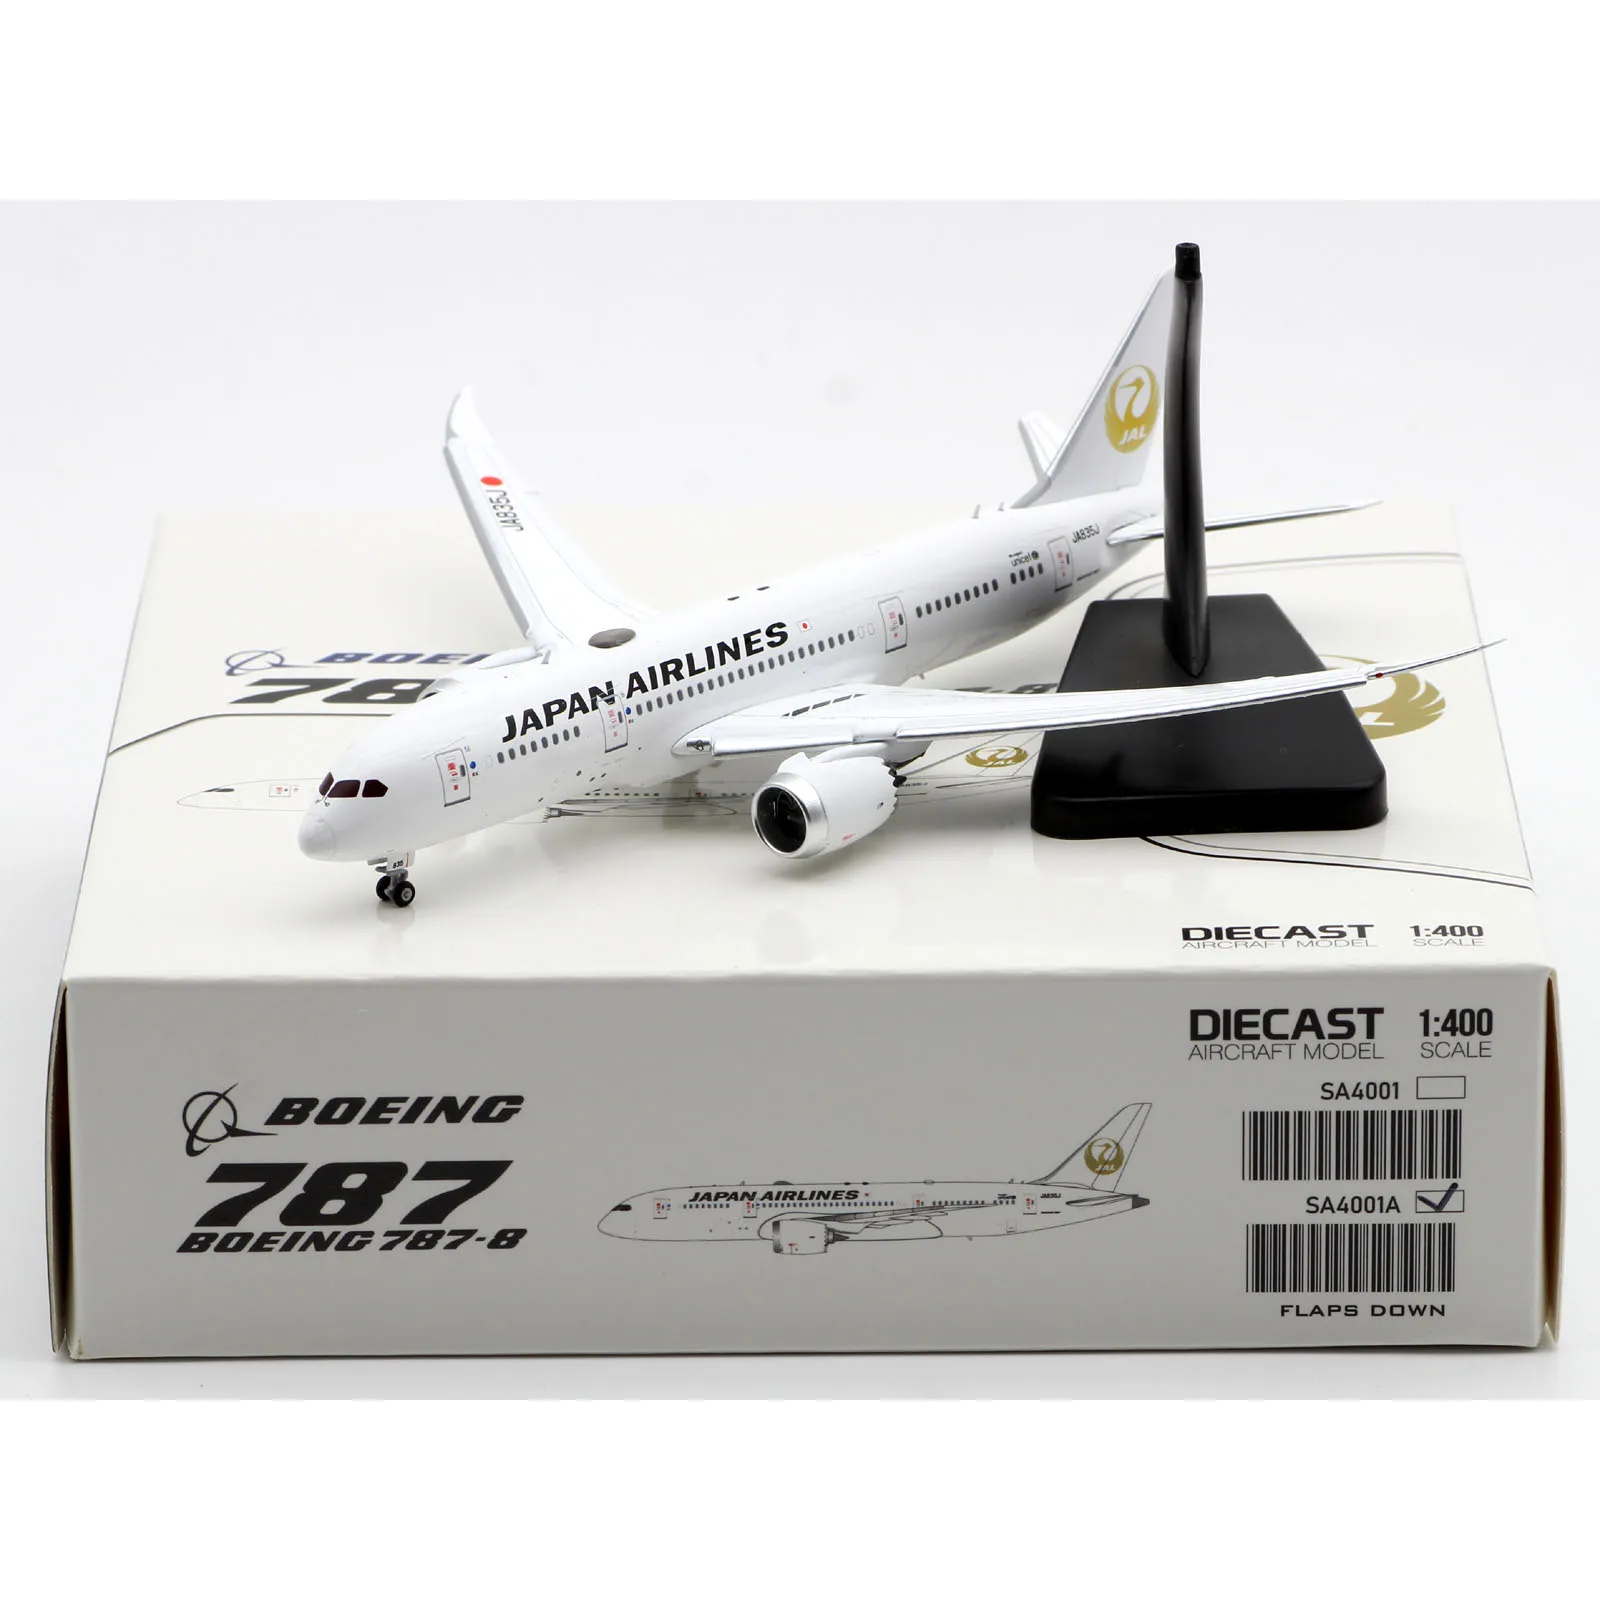 sa4001a-regalo-aereo-da-collezione-in-lega-jc-wings-1-400-japan-airlines-jal-boeing-b787-8-diecast-aircraft-jet-model-ja835j-flap-down